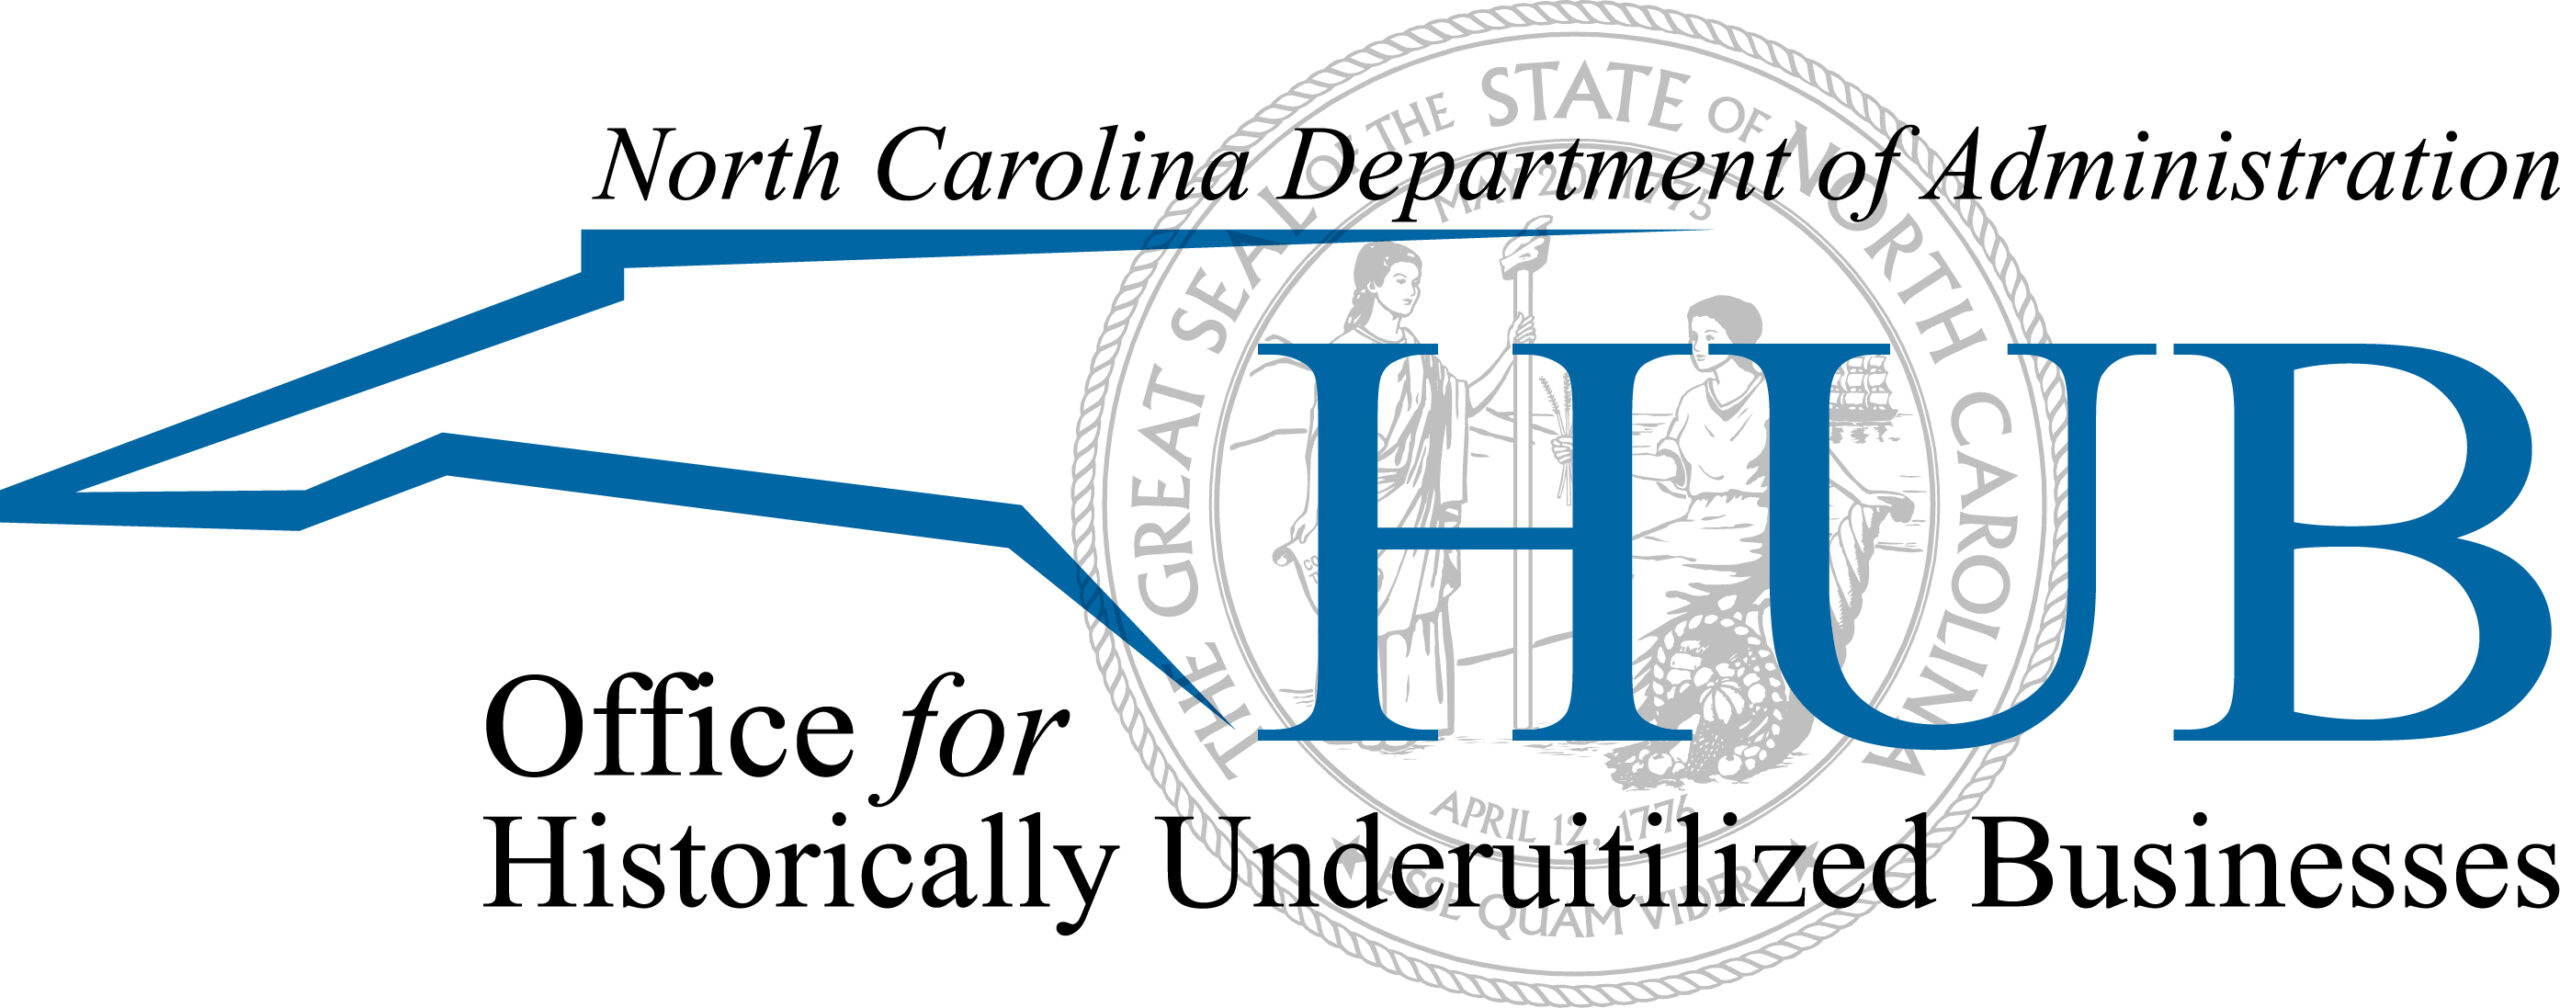 The  Historically Underutilized Business Program  was created to promote full and equal procurement opportunities for small, minority- and women-owned businesses. Companies interested in doing business with the state are encouraged to become HUB certified.